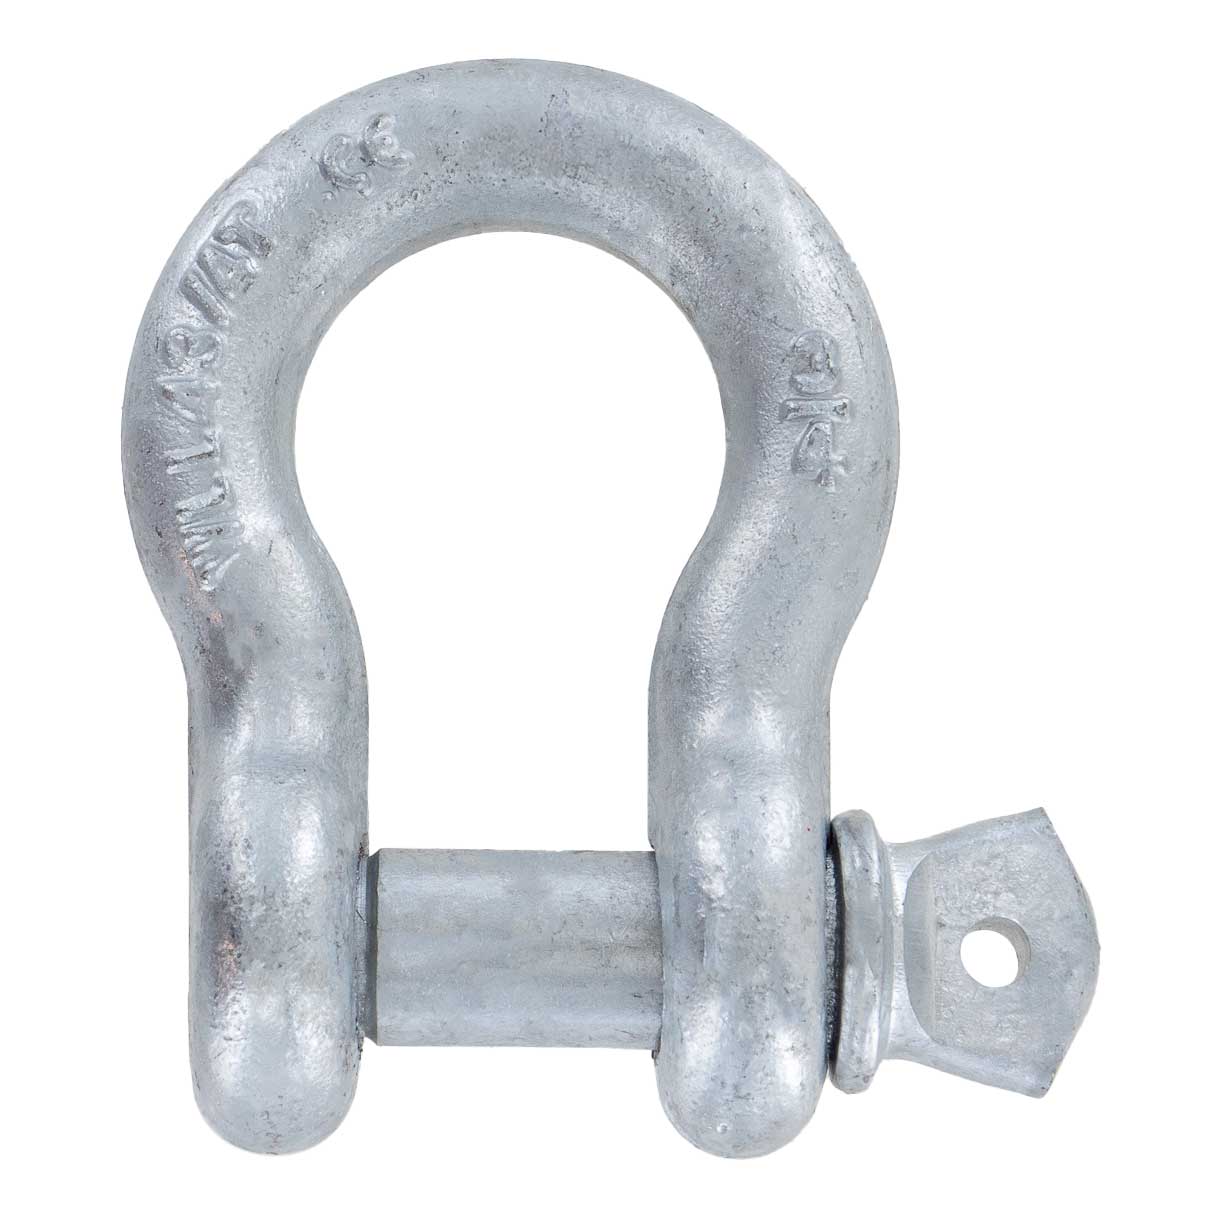 1-1/4" Galvanized Screw Pin Anchor Shackle - 12 Ton primary image